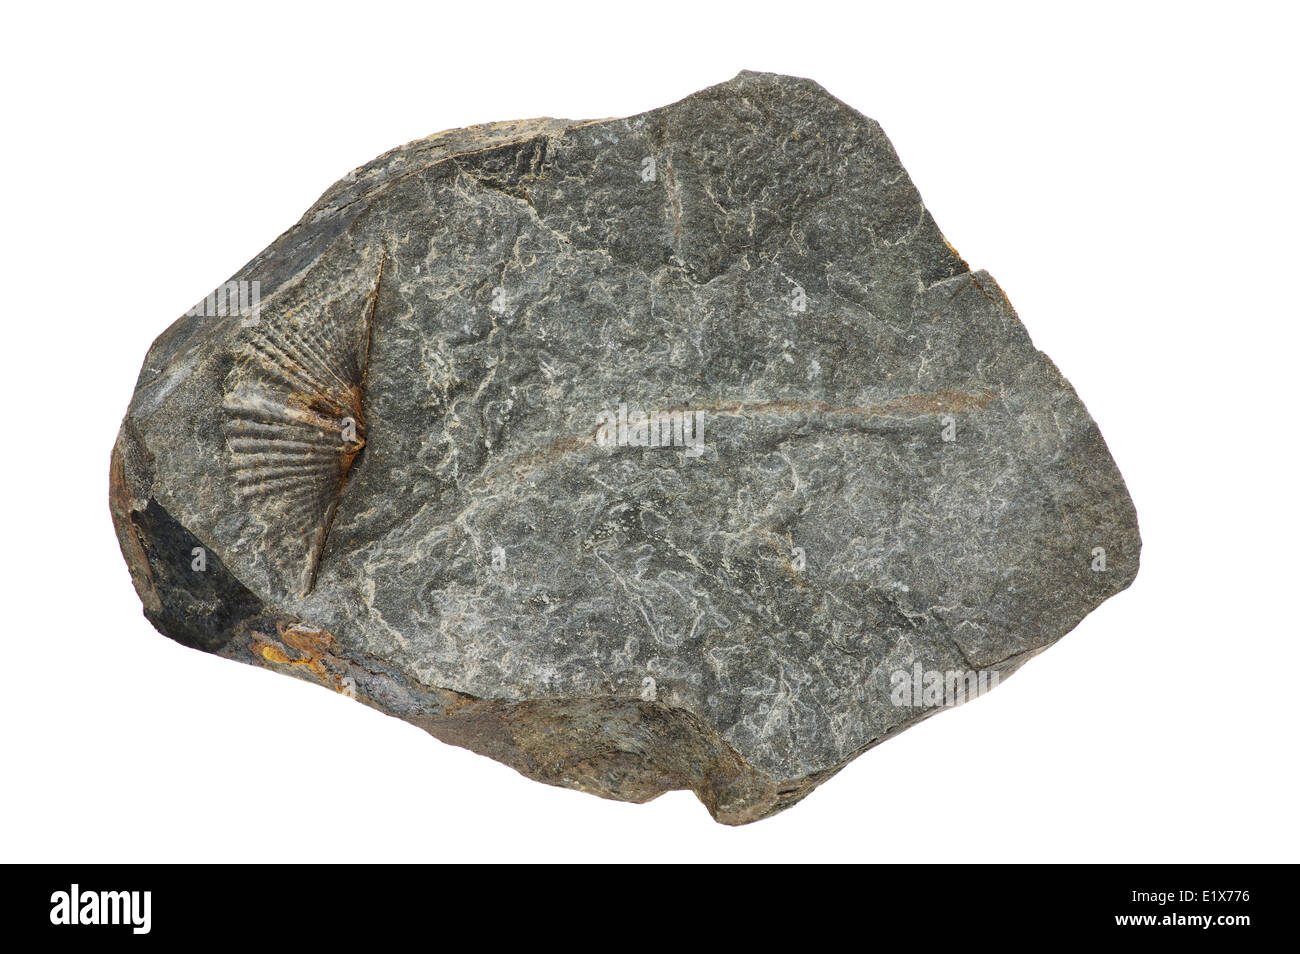 macro image of fossil brachipod in a Marcellus shale rock isolated on white Stock Photo